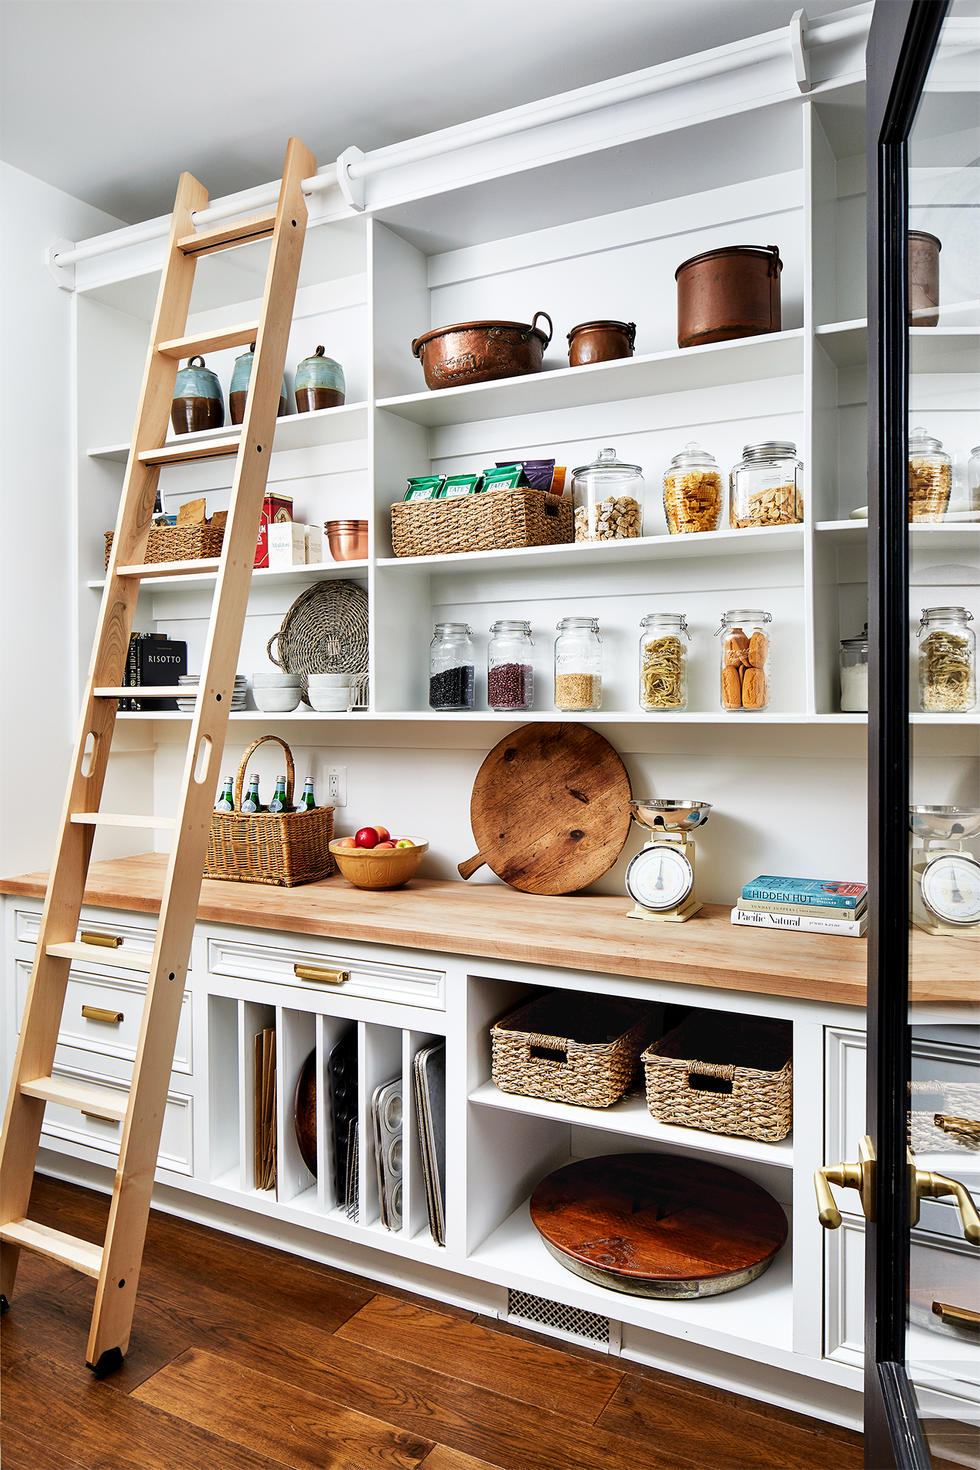 Expert Ideas for Adding a Pantry to a Galley Kitchen